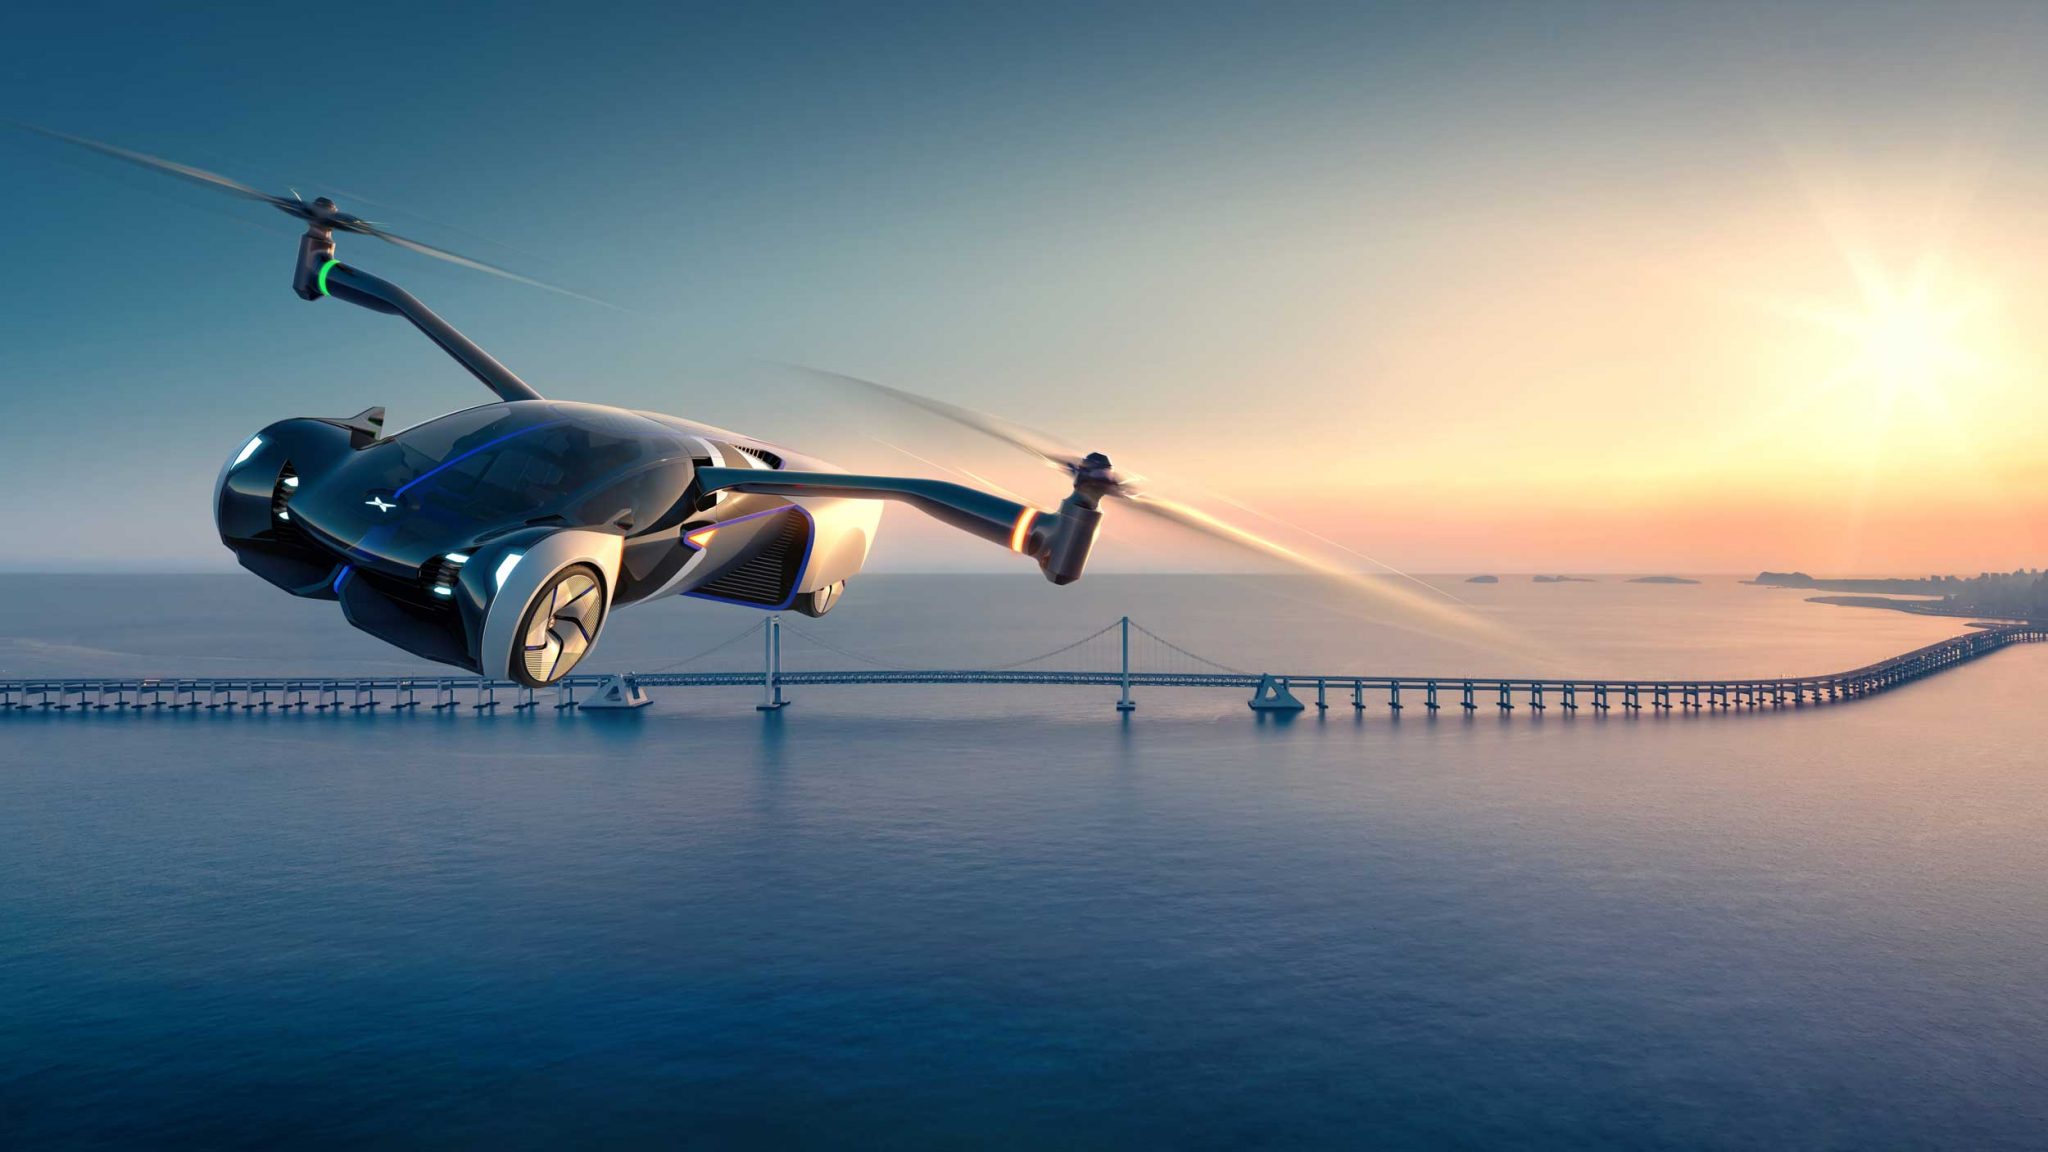 Aston Martin reveals stunning hybridelectric flying car concept FLYER